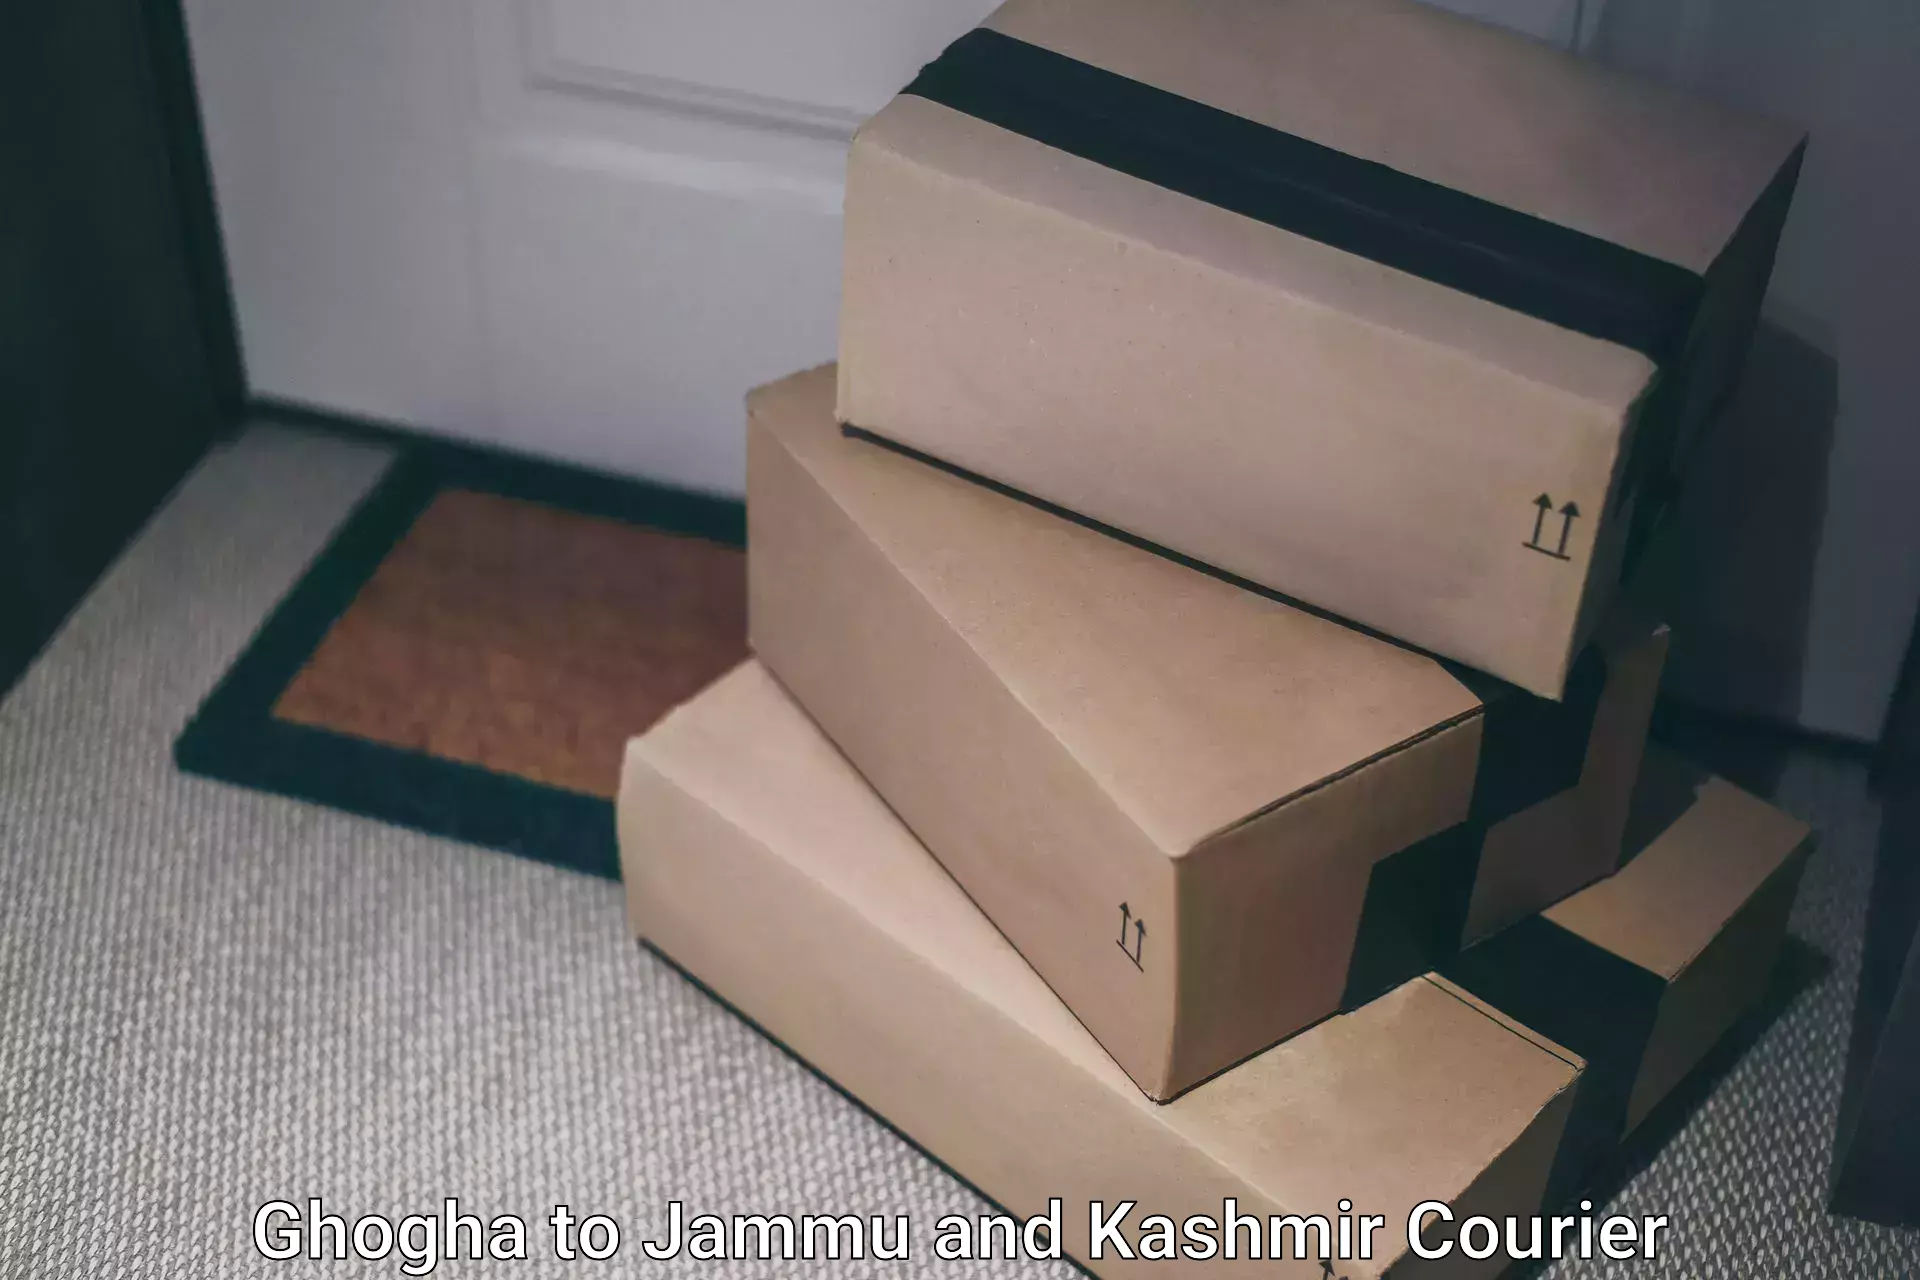 State-of-the-art courier technology in Ghogha to Jammu and Kashmir